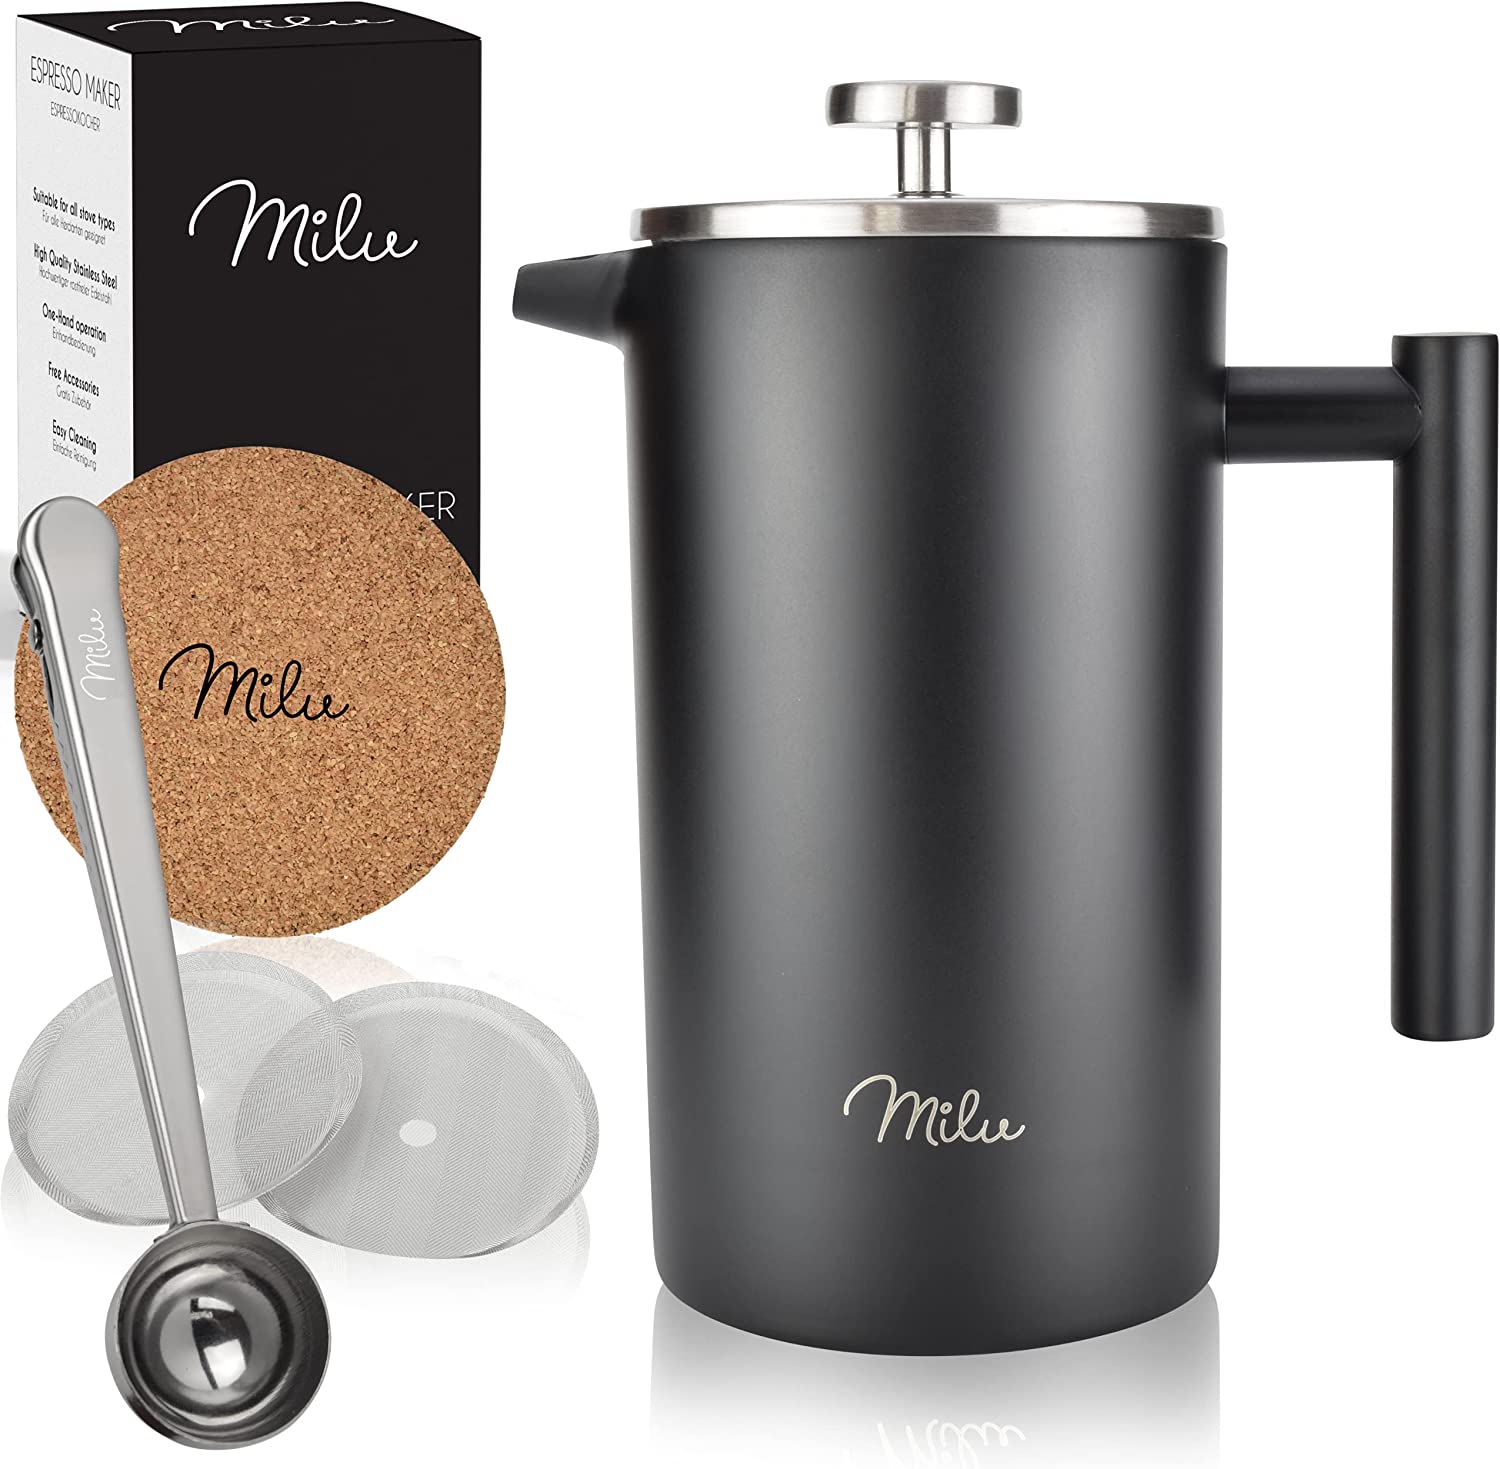 Milu French Press Coffee Maker | 350ml, 600ml, 1L | Stainless Steel Coffee Press Coffee Maker for Home Travel Camping Includes Coaster, Spoon, Replacement Filter (Black, 350ml (2 Cups)